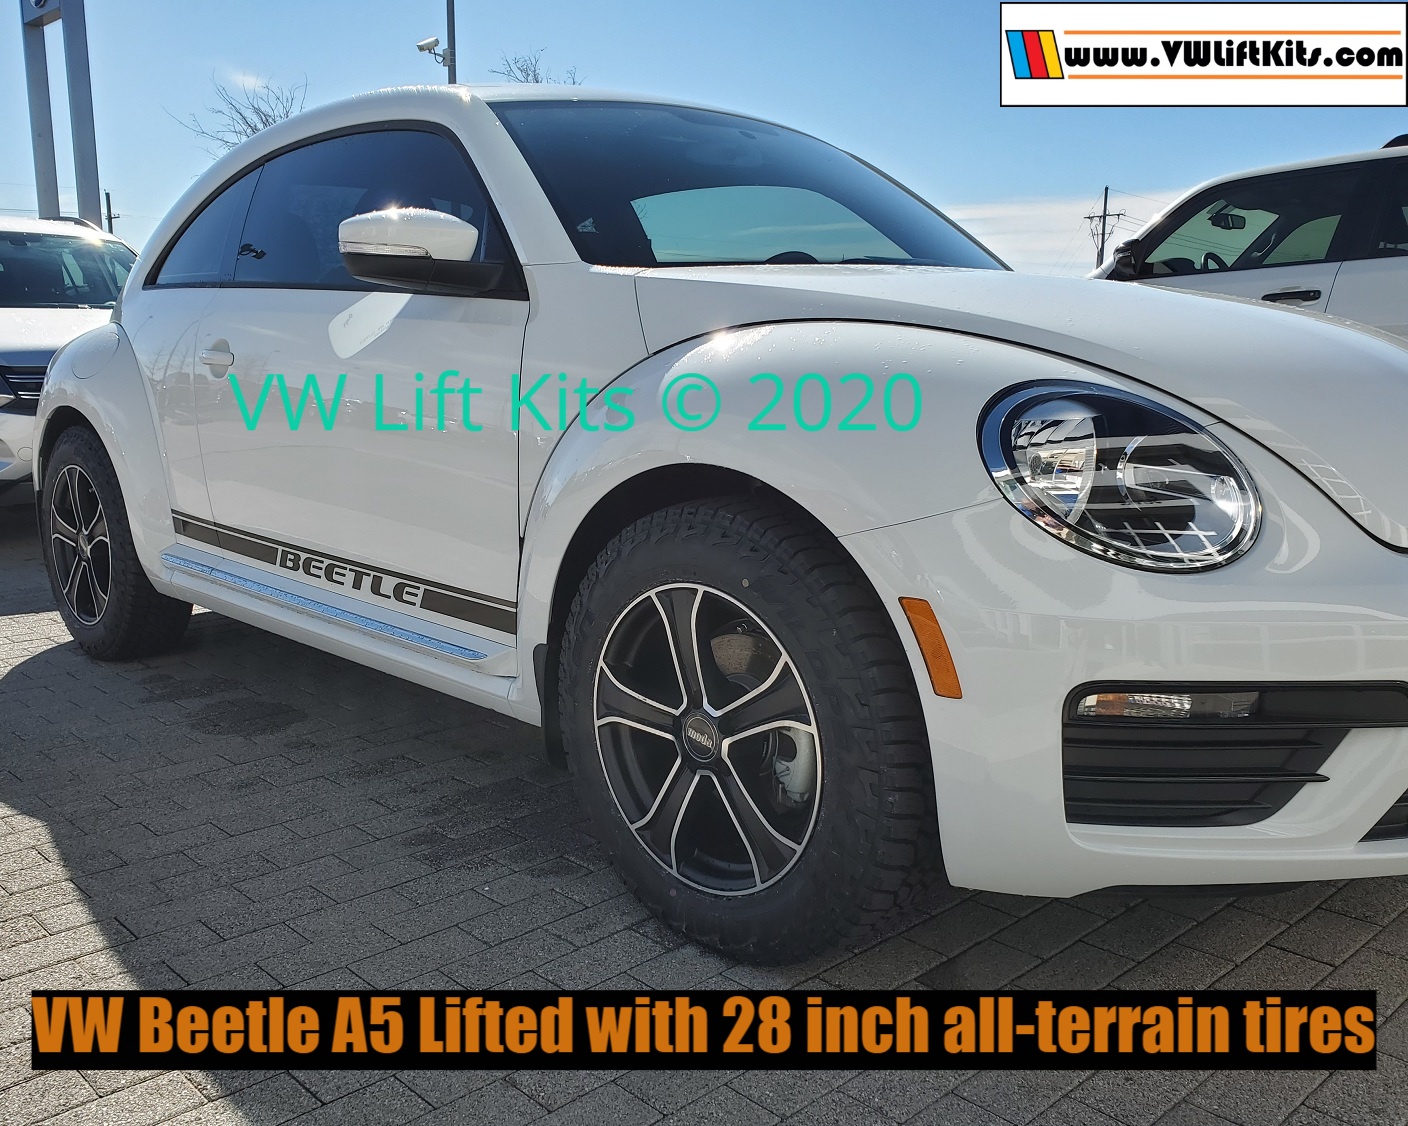 2019 VW Beetle A5 lifted properly at Street VW Dealership in Amarillo Tx. Top of the line bolt-on kit.